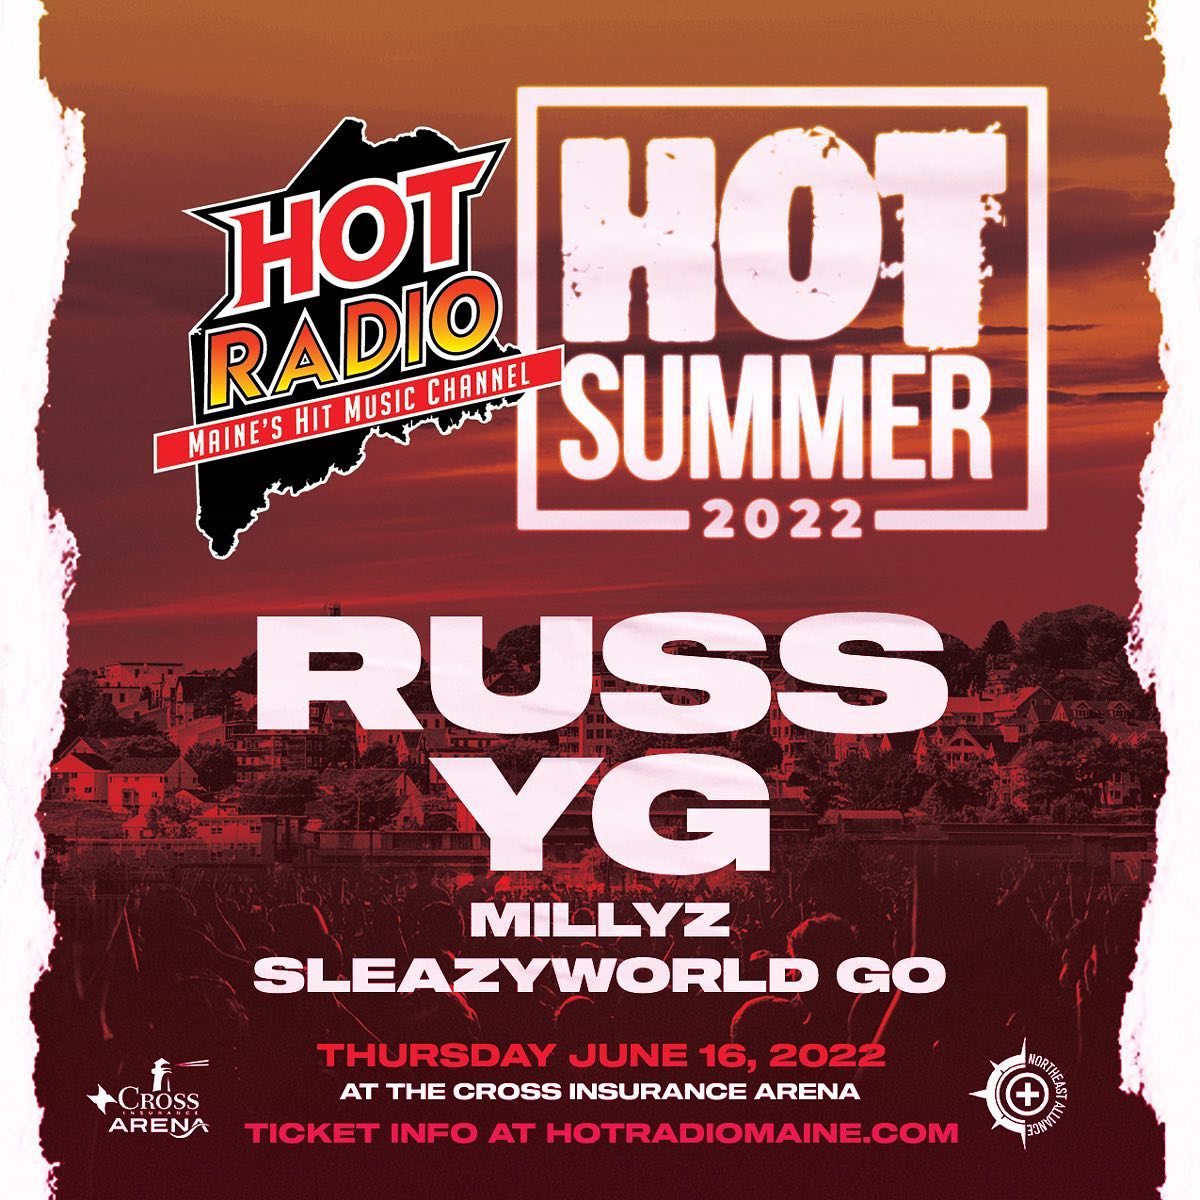 ðŸš¨ GIVEAWAY ðŸš¨ Weâ€™ve got your chance to win a pair of tickets to HOT SUMMER!! To enter, tag your concert buddy in the comments & SHARE this post to your IG story.  Unlimited entries allowed, go crazy! Winners will be chosen at random by 12pm Monday 4/16.